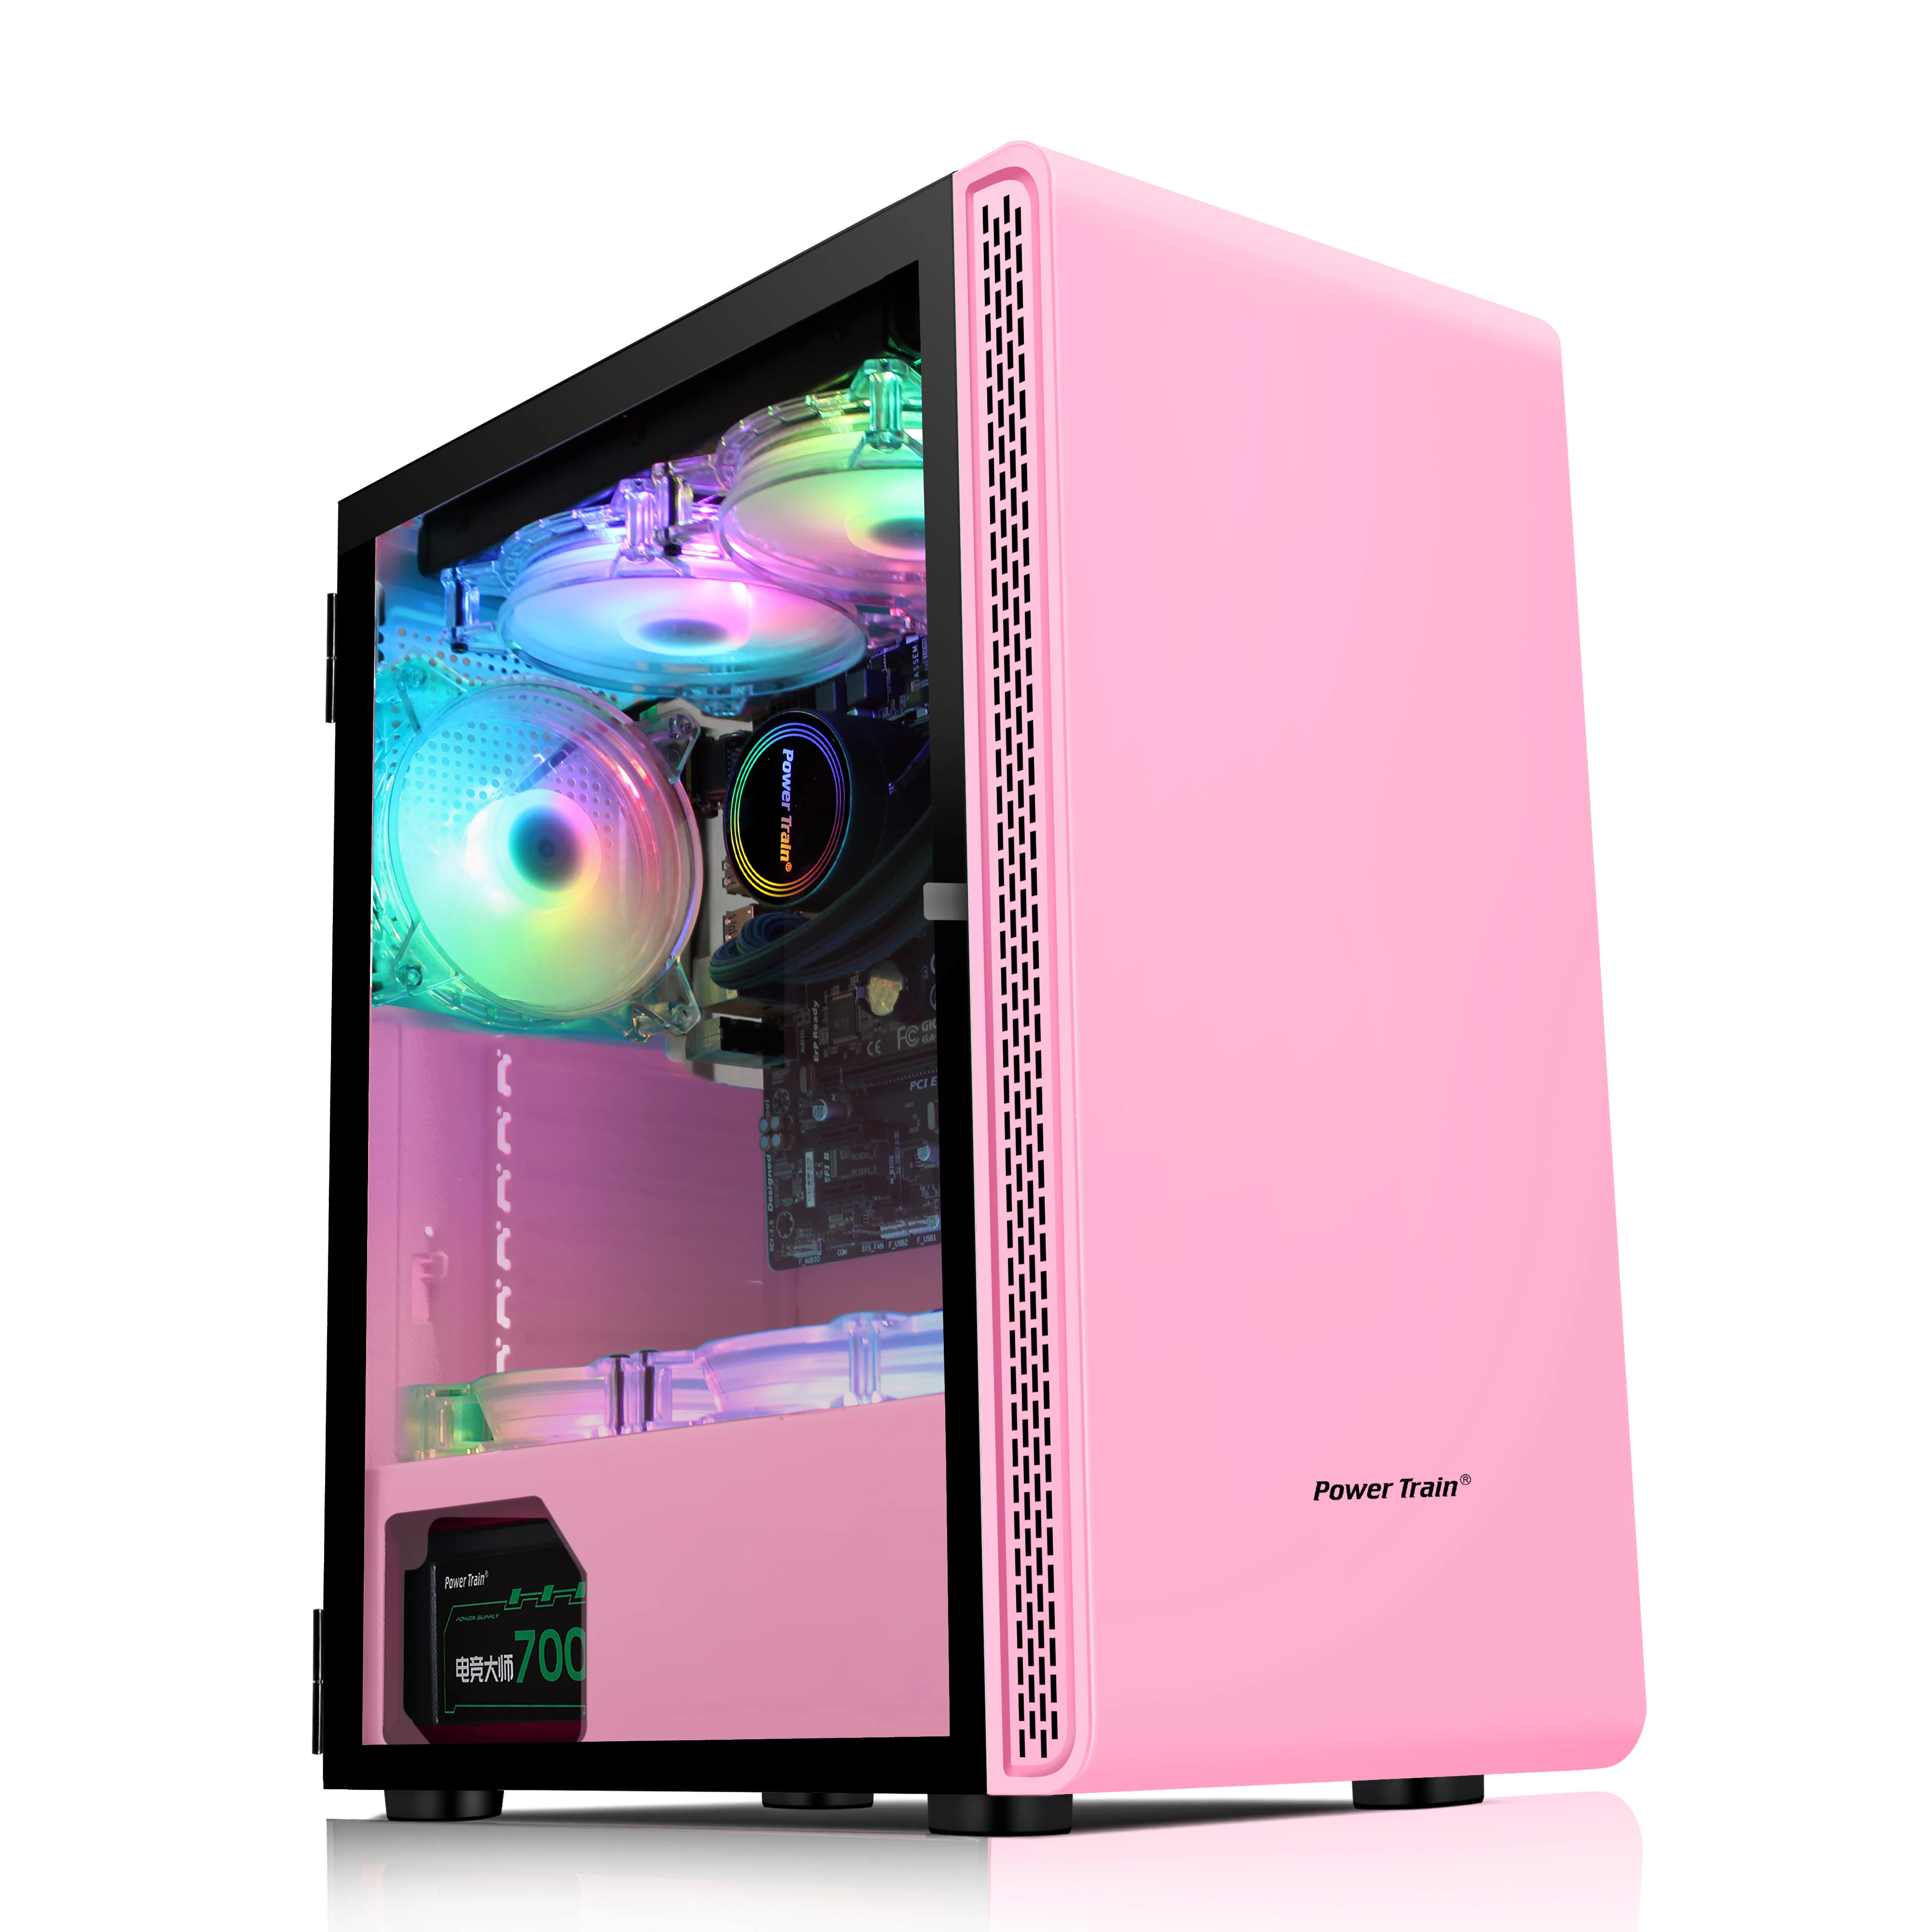 

Don't Miss New Product Daofeng5 Pink Green Pc Gaming Case Full Tower Accessories Computer Case, Black white